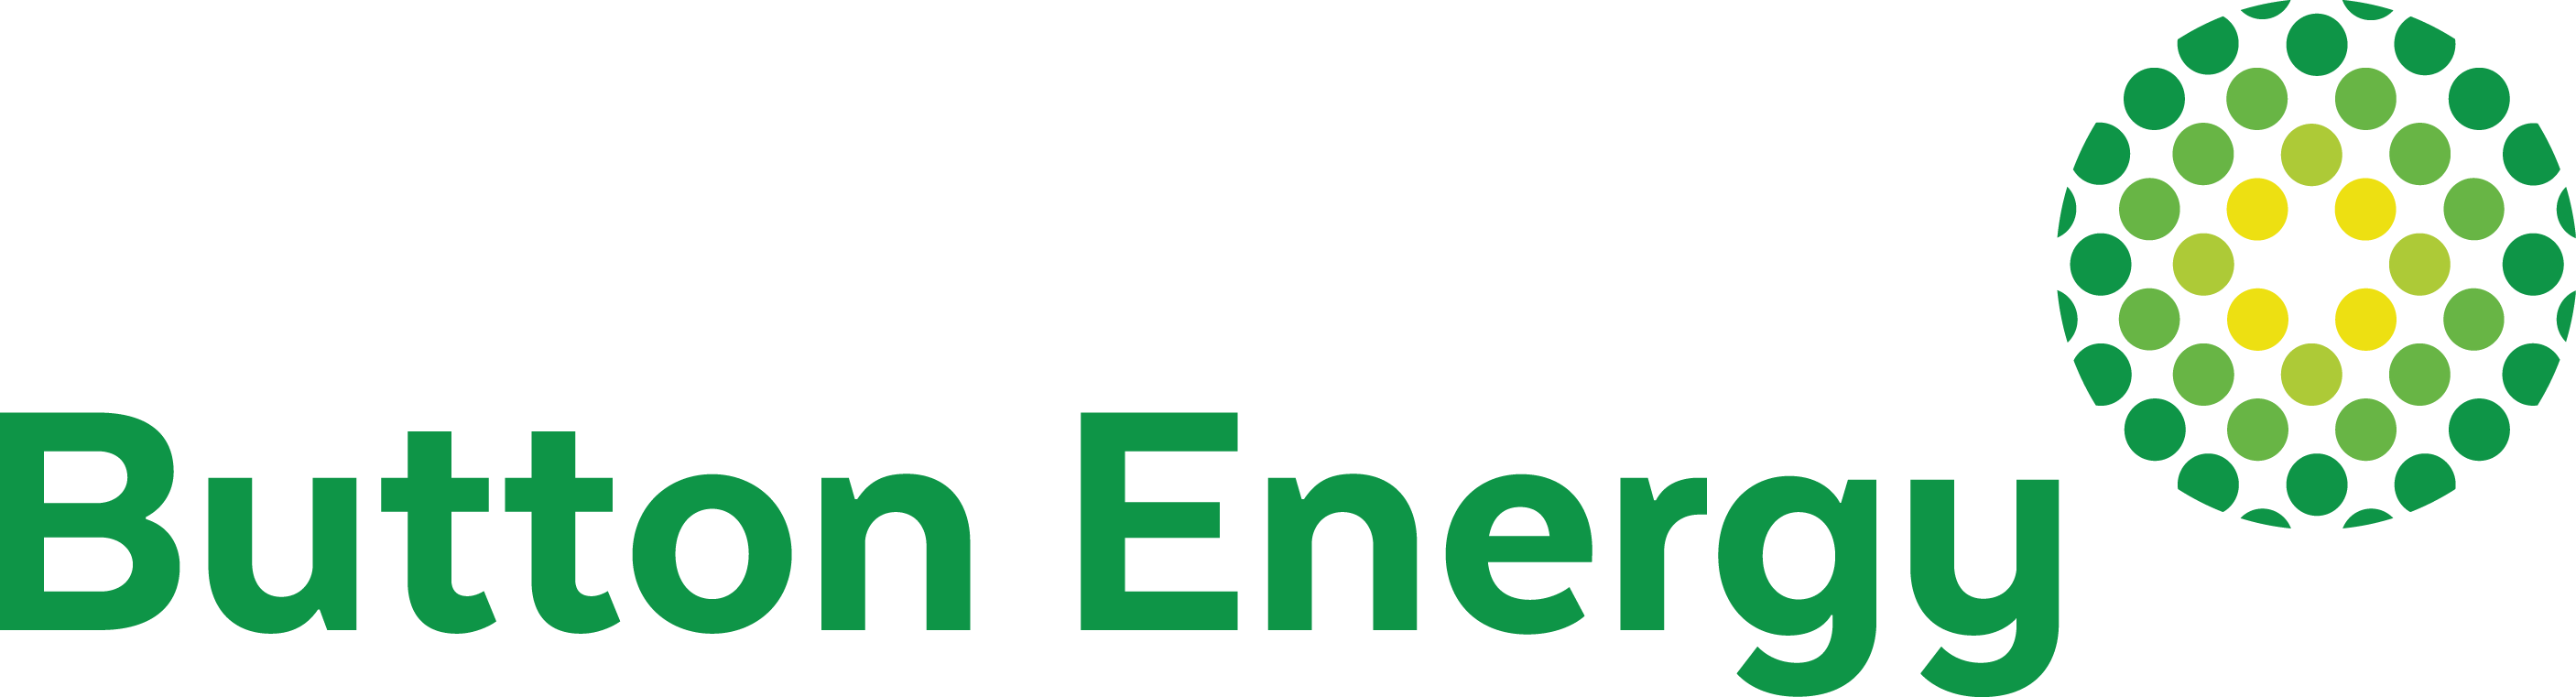 Button Energy Fuels Growth: Expanding Operations to Deliver Enhanced Energy Solutions